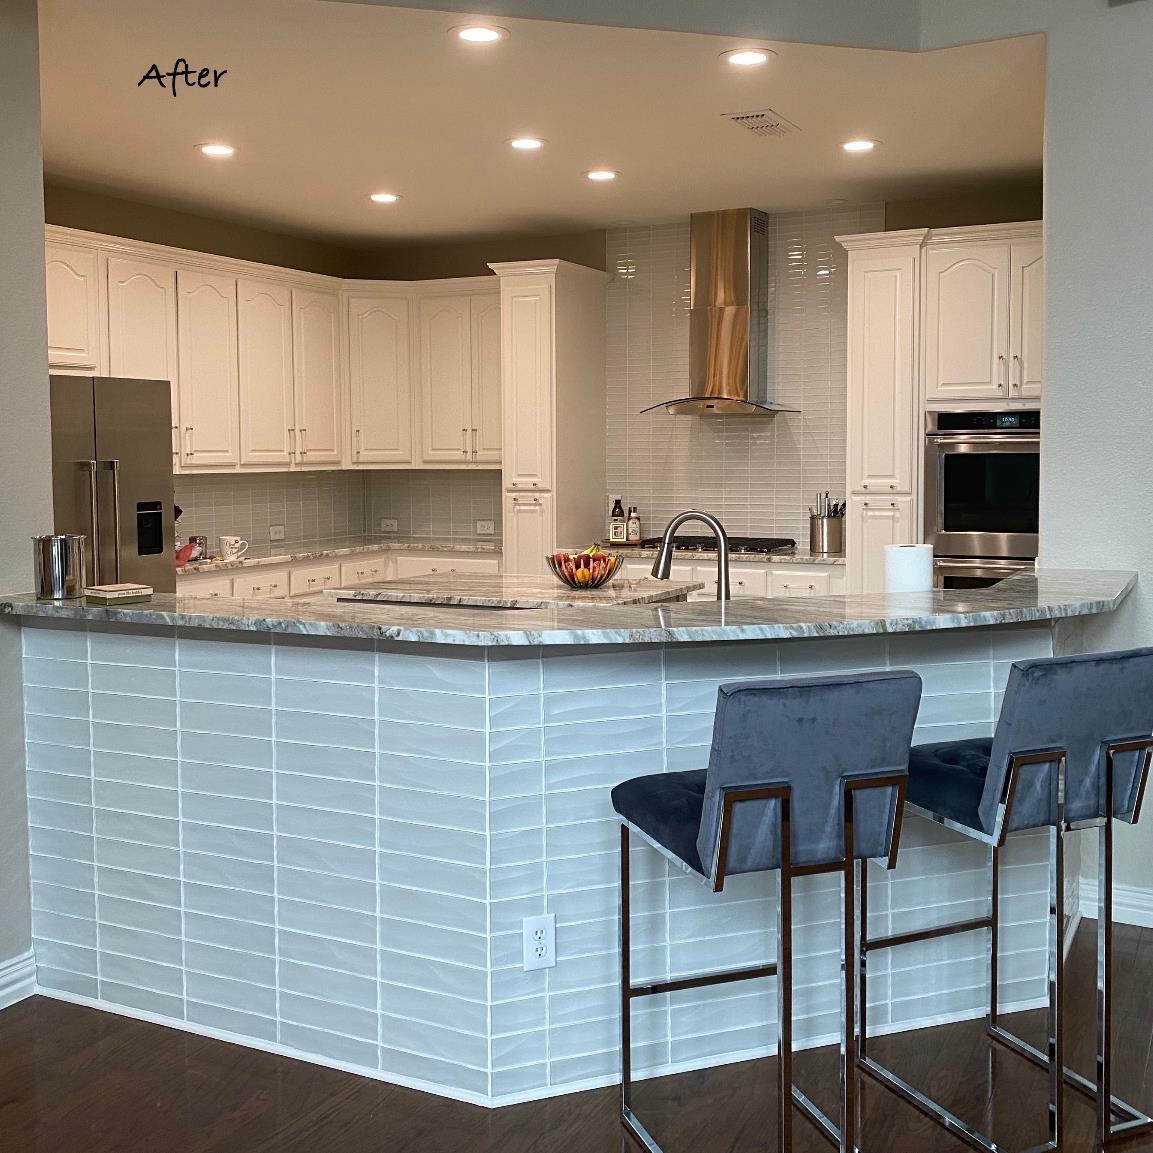 An image of countertops in a kitchen completed by ProSource of Fort Worth